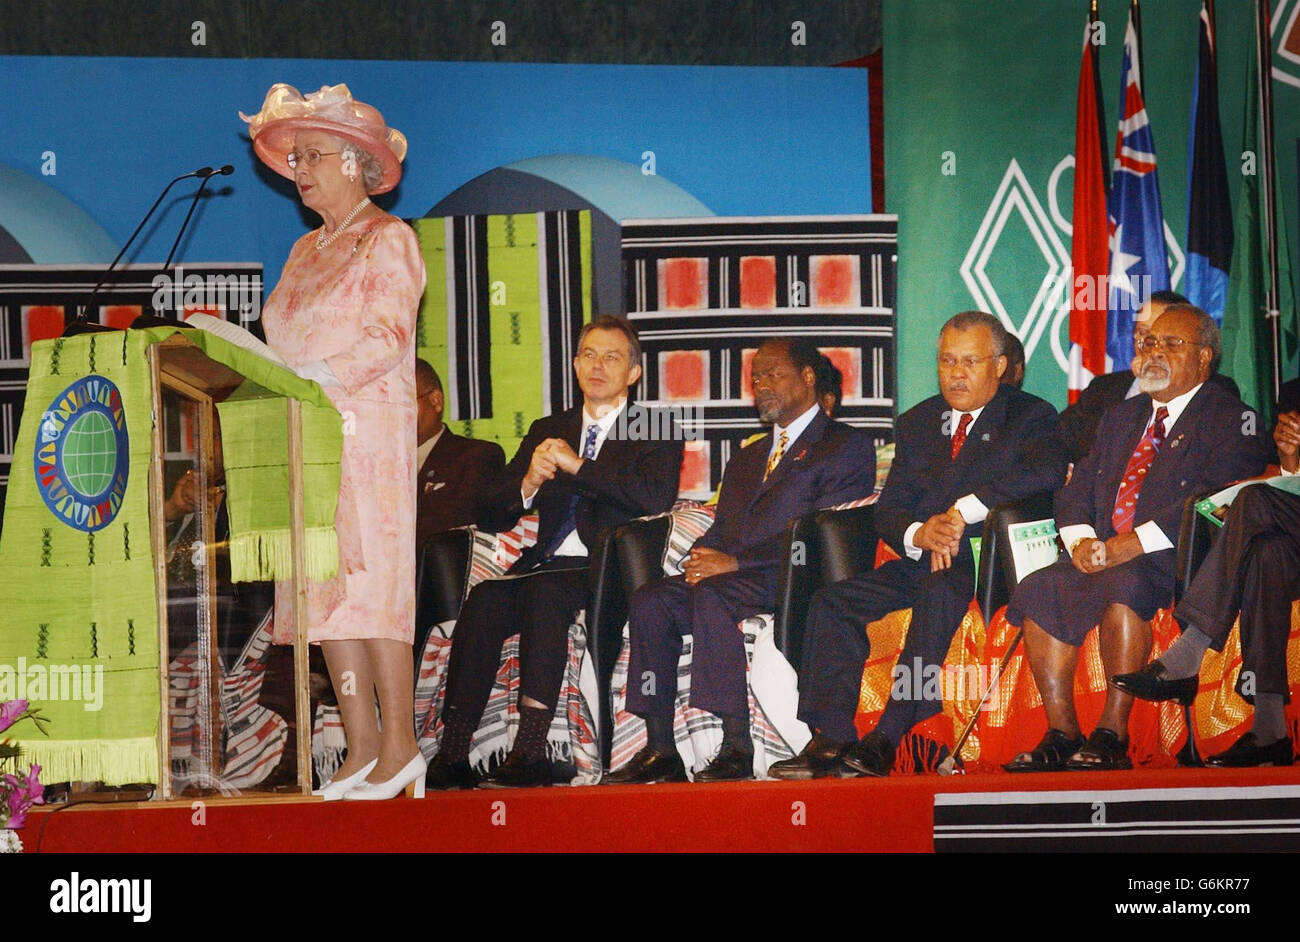 Britains Queen Elizabeth II makes a speech to officially open this year's Commonwealth Heads of Government Meeting in Abuja, Nigeria. Disagreement over whether to reinstate Zimbabwe threatened to split rich Western and poor African countries as a 52-nation Commonwealth summit opened ' without a 53rd member, Robert Mugabe's Zimbabwe. Stock Photo